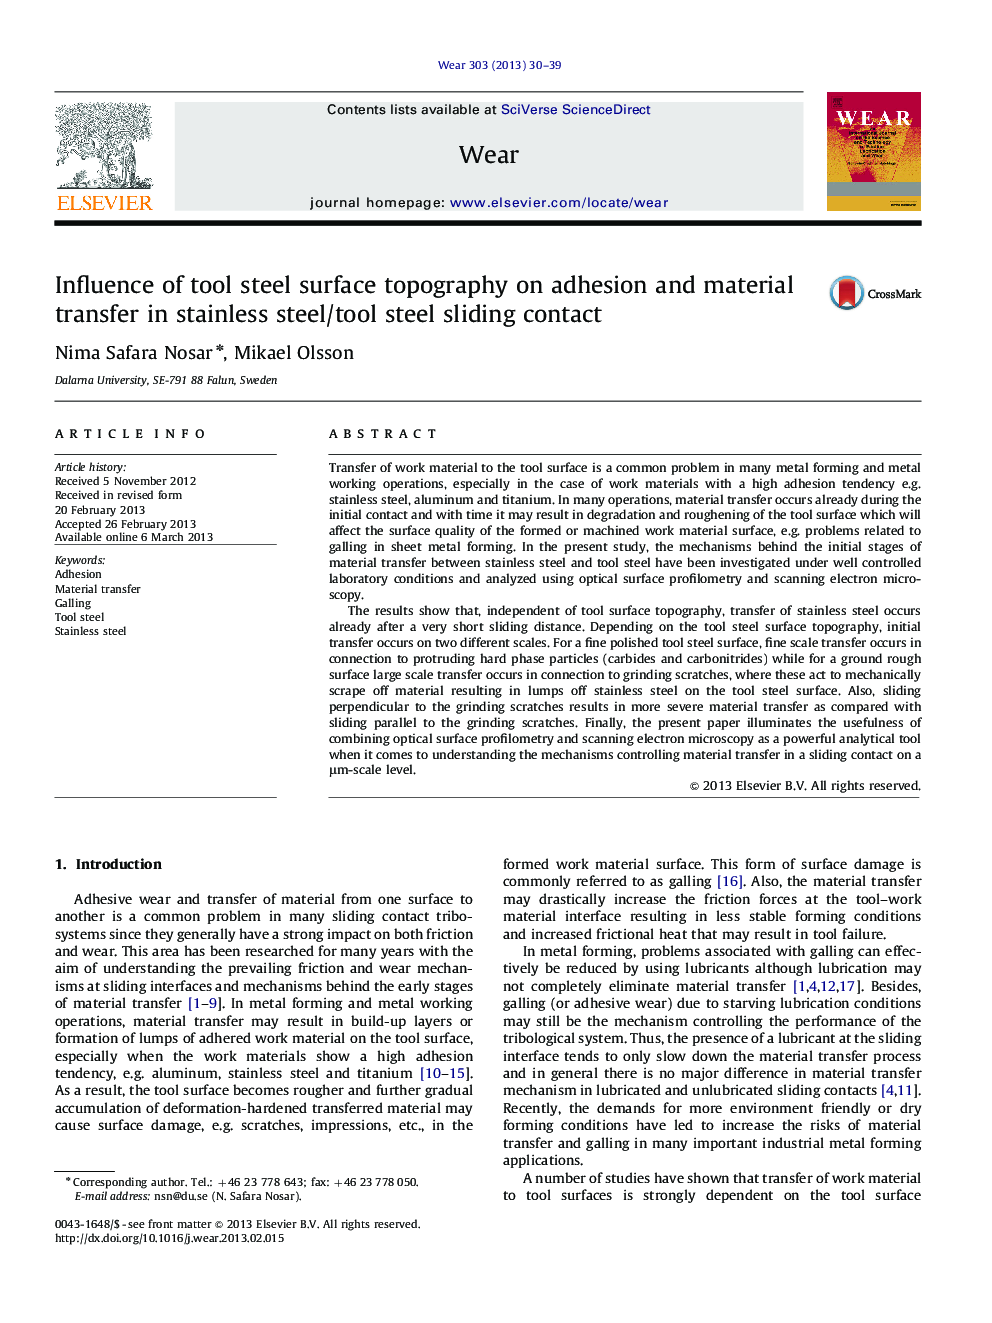 Influence of tool steel surface topography on adhesion and material transfer in stainless steel/tool steel sliding contact